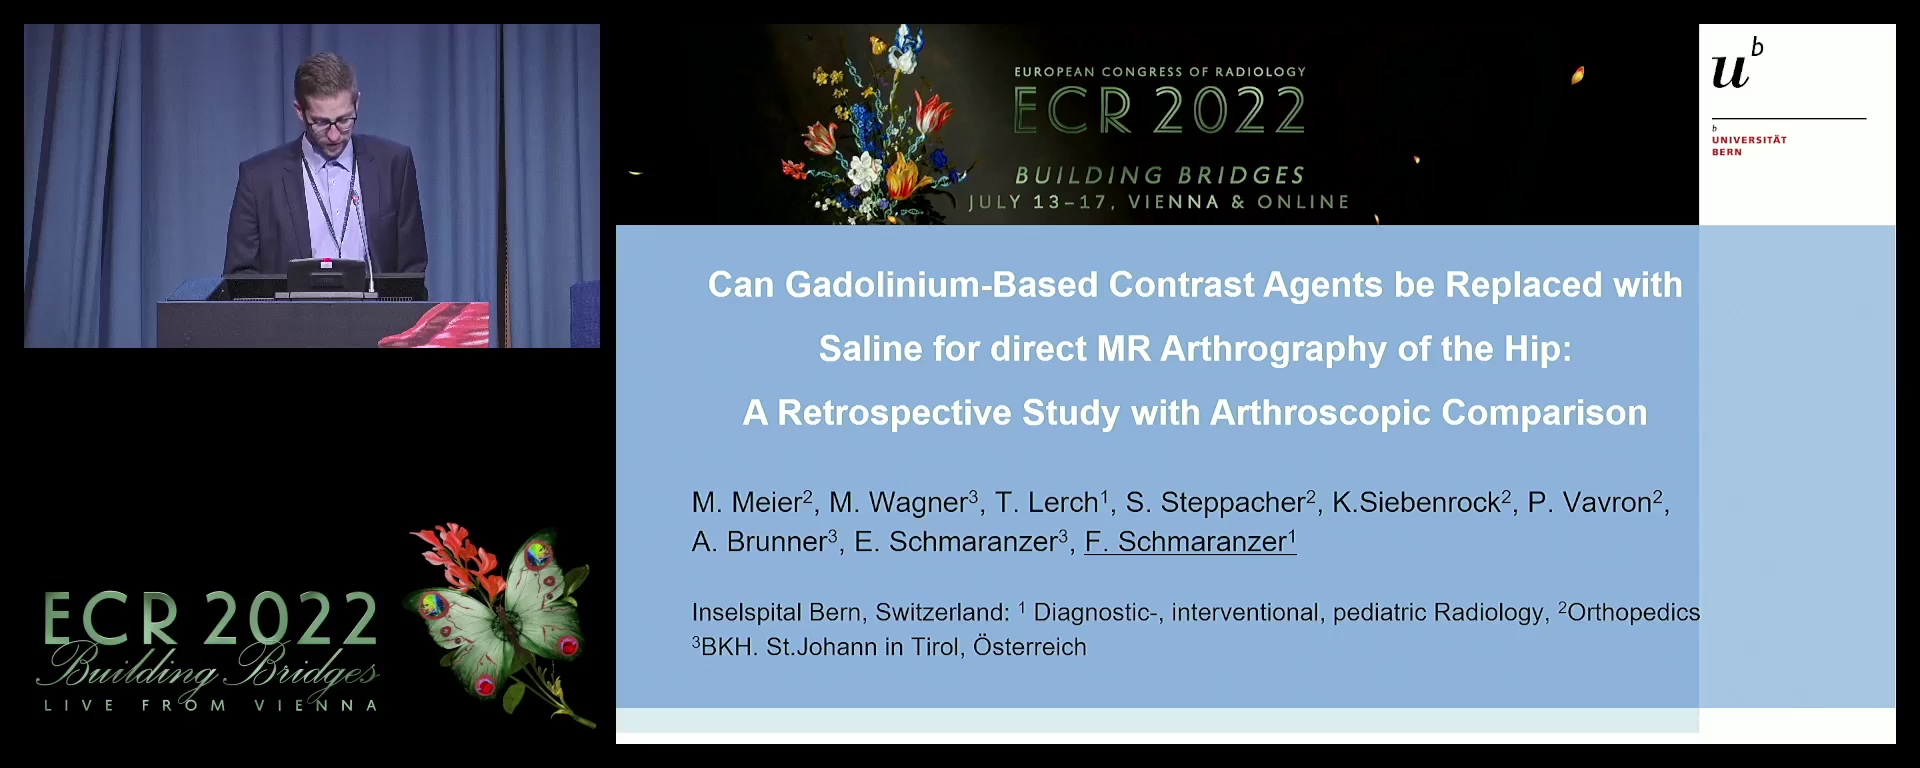 Can gadolinium contrast agents be replaced with saline for direct MR arthrography of the hip? A retrospective study with arthroscopic comparison